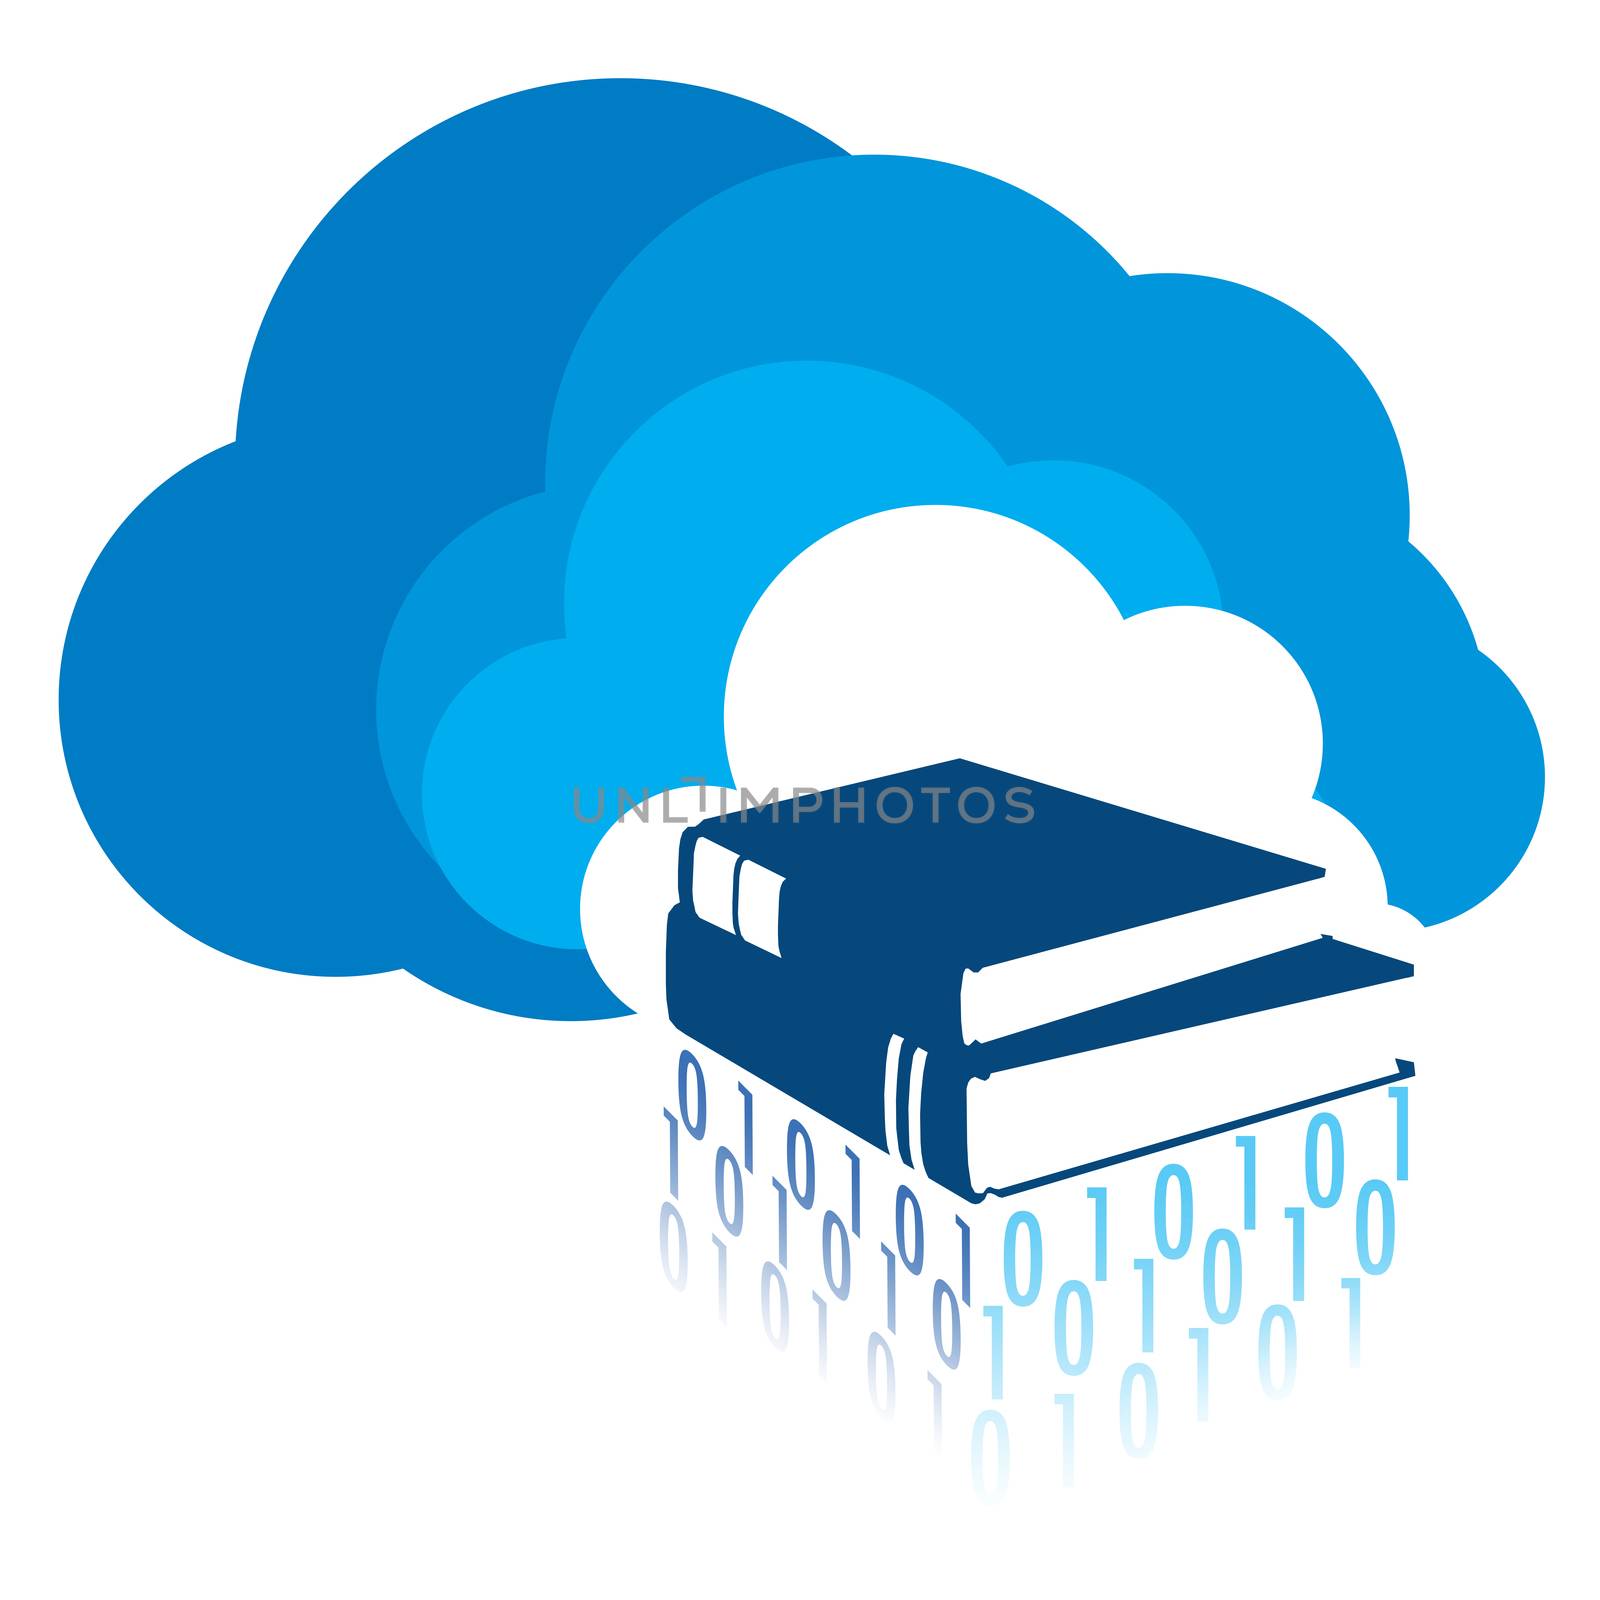 Study and research material placed on a cloud. Digital wisdom passed on through cloud computing technology.